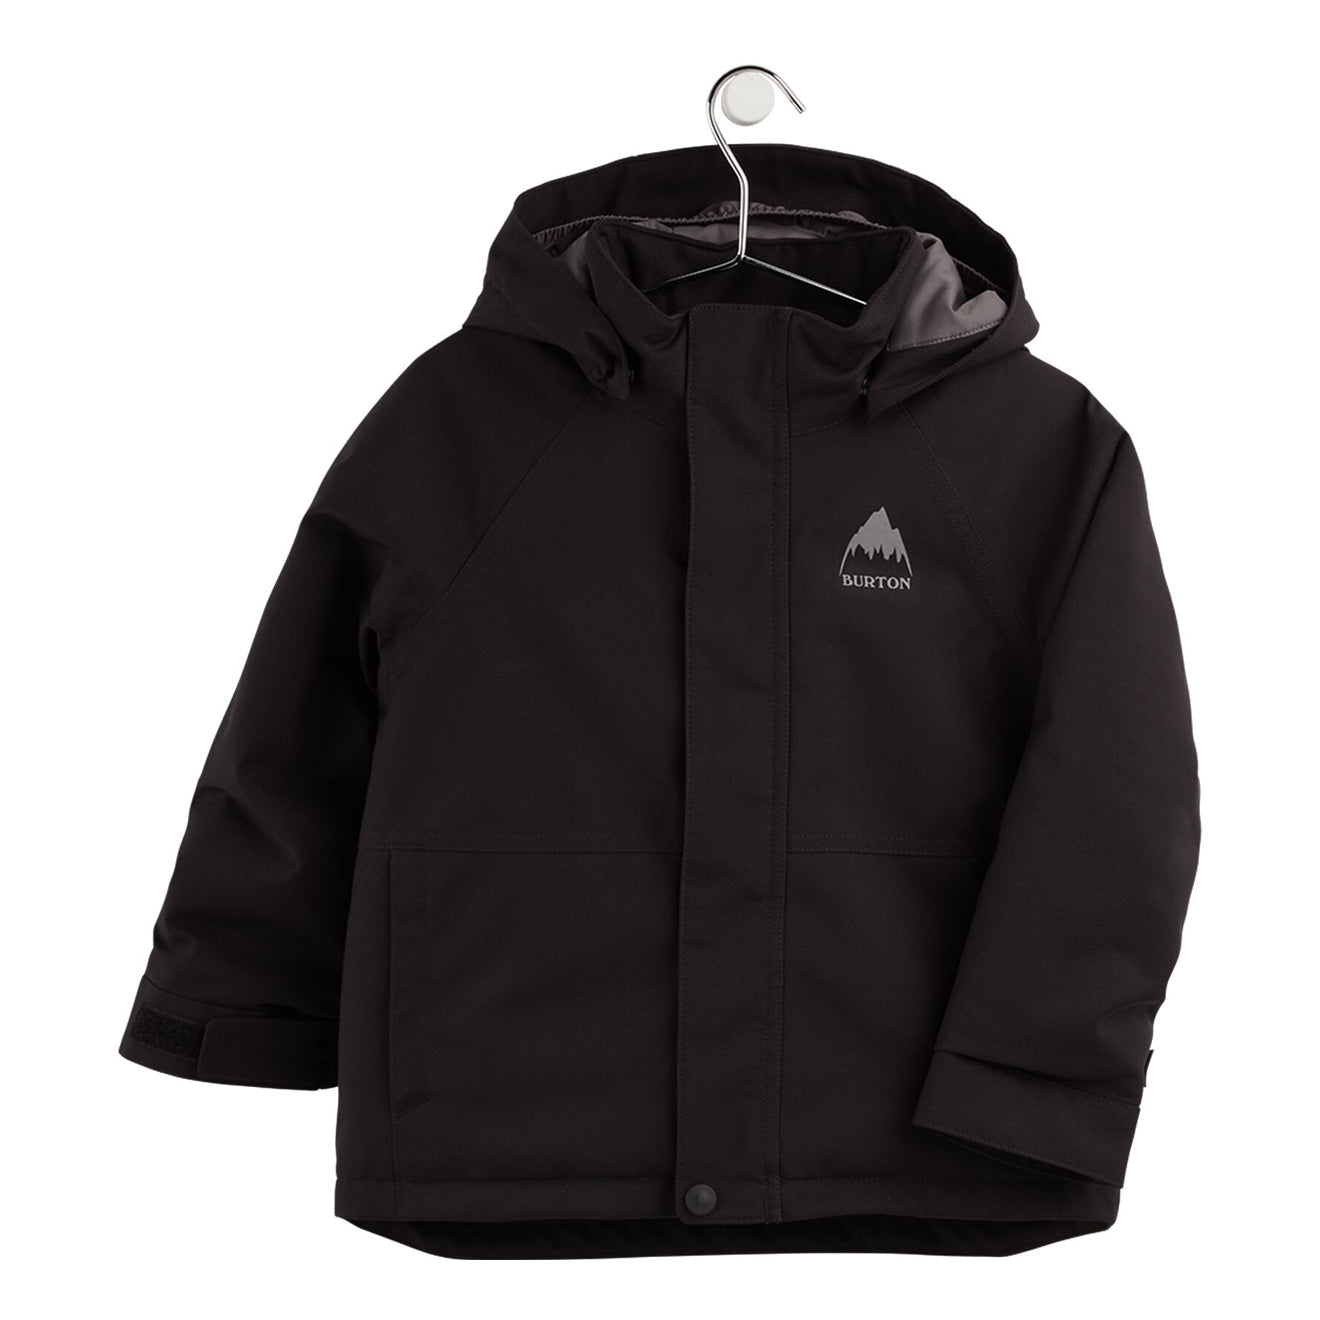 Toddlers' Classic Jacket - True Black